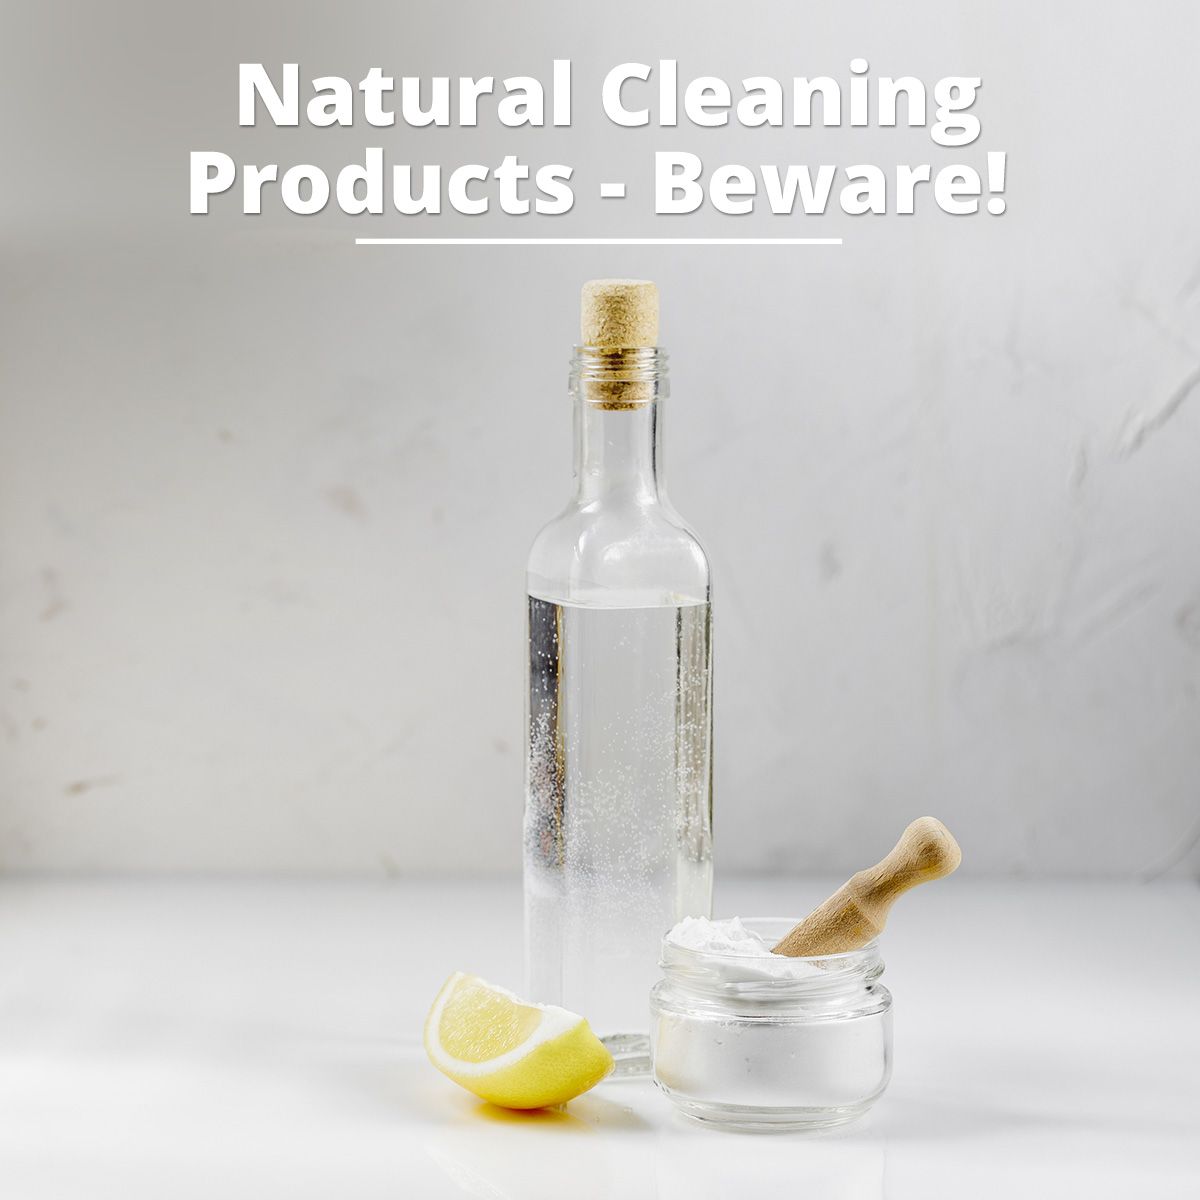 Natural Cleaning Products - Beware!